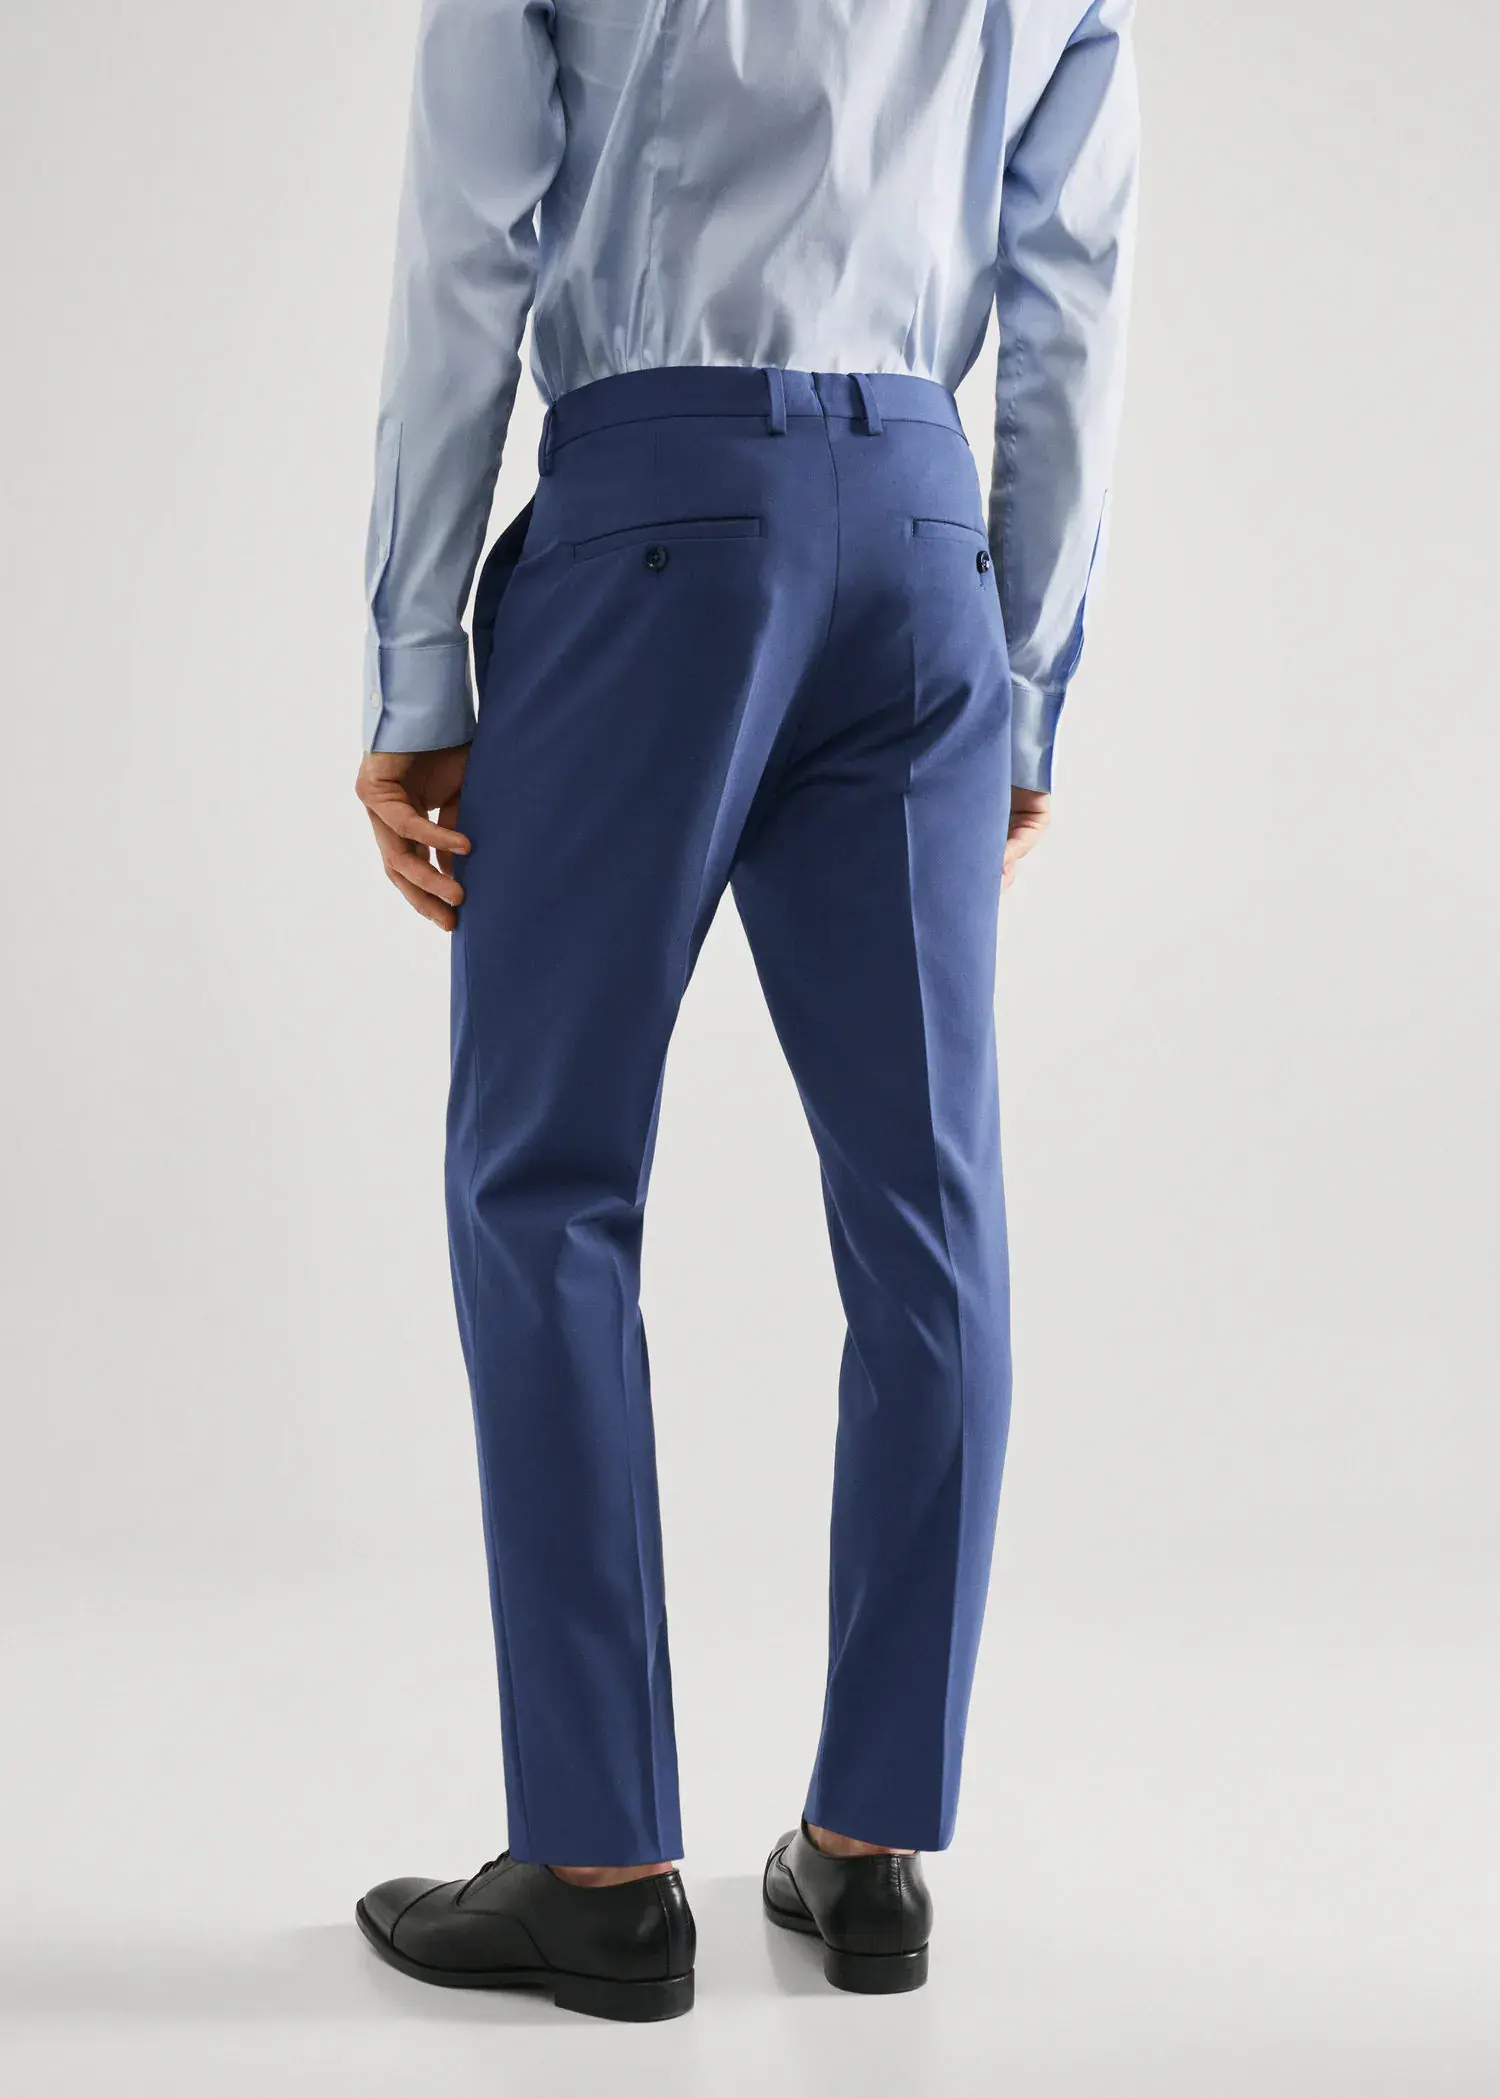 Mango Stretch fabric super slim-fit suit pants. a man wearing a blue suit standing next to a white wall. 